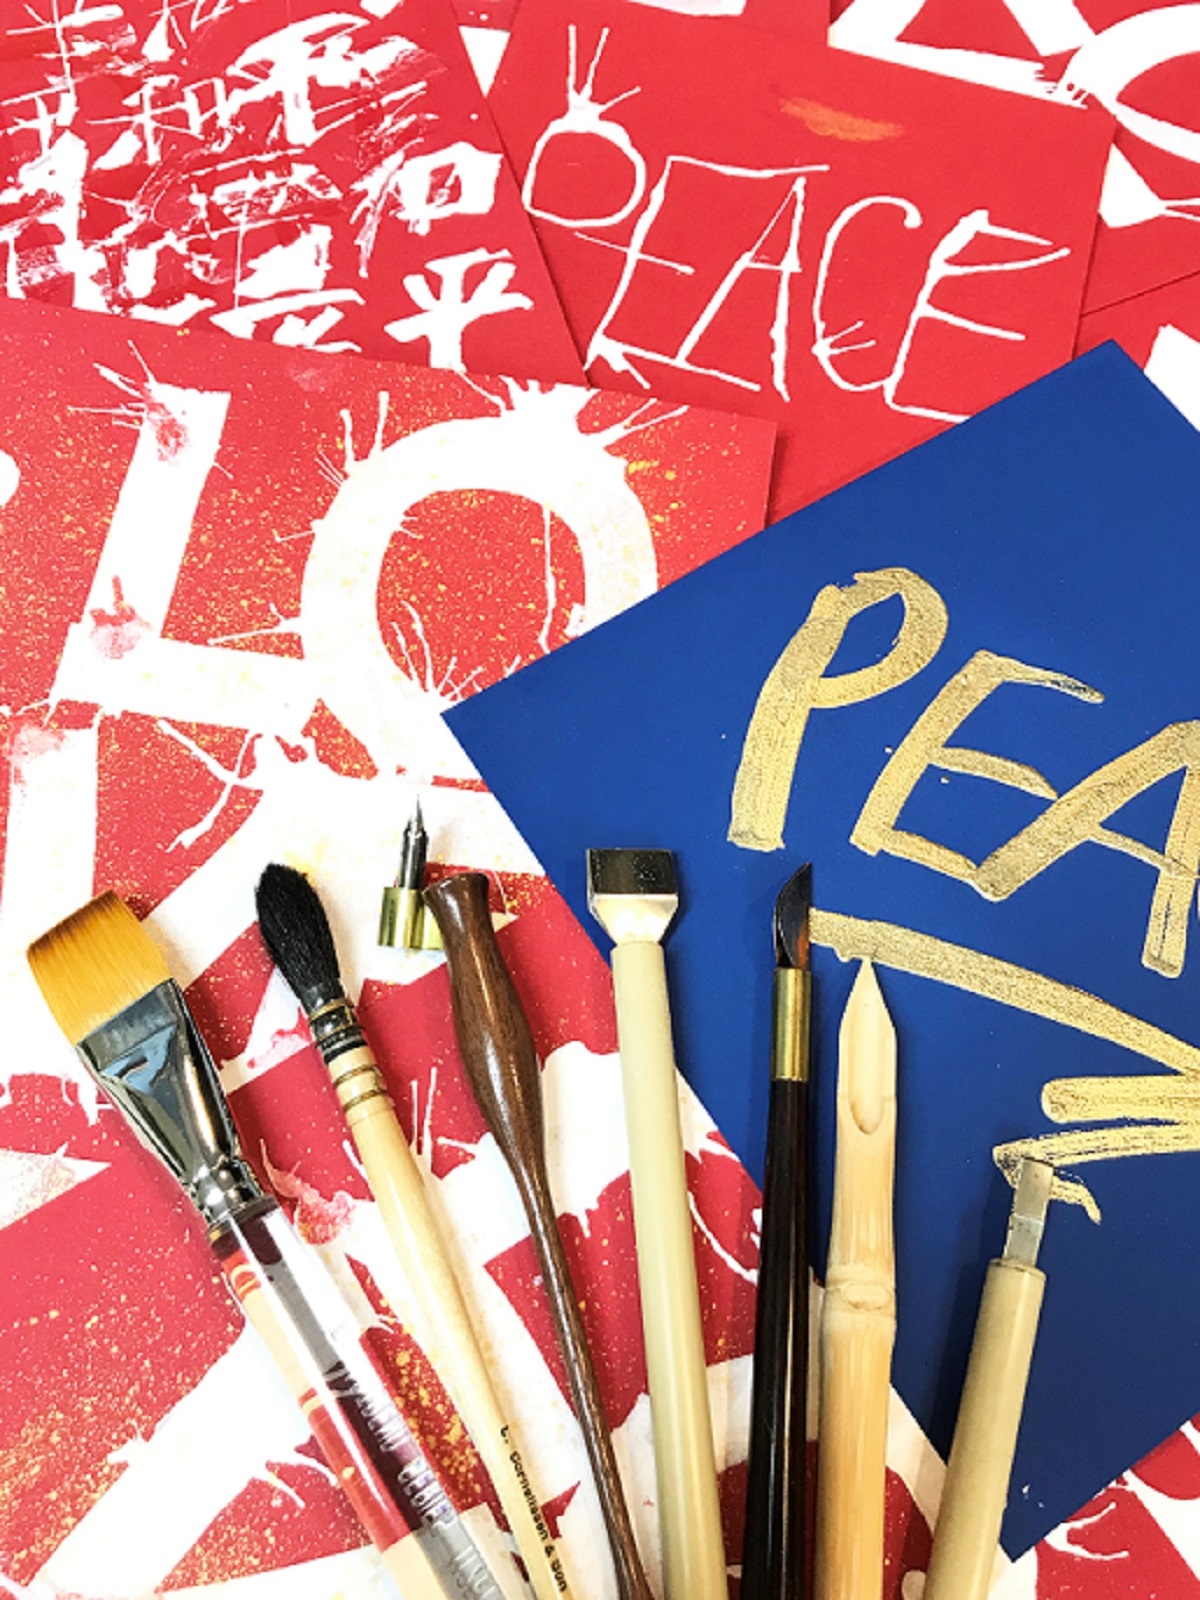 Family Workshop: Fun with Calligraphy